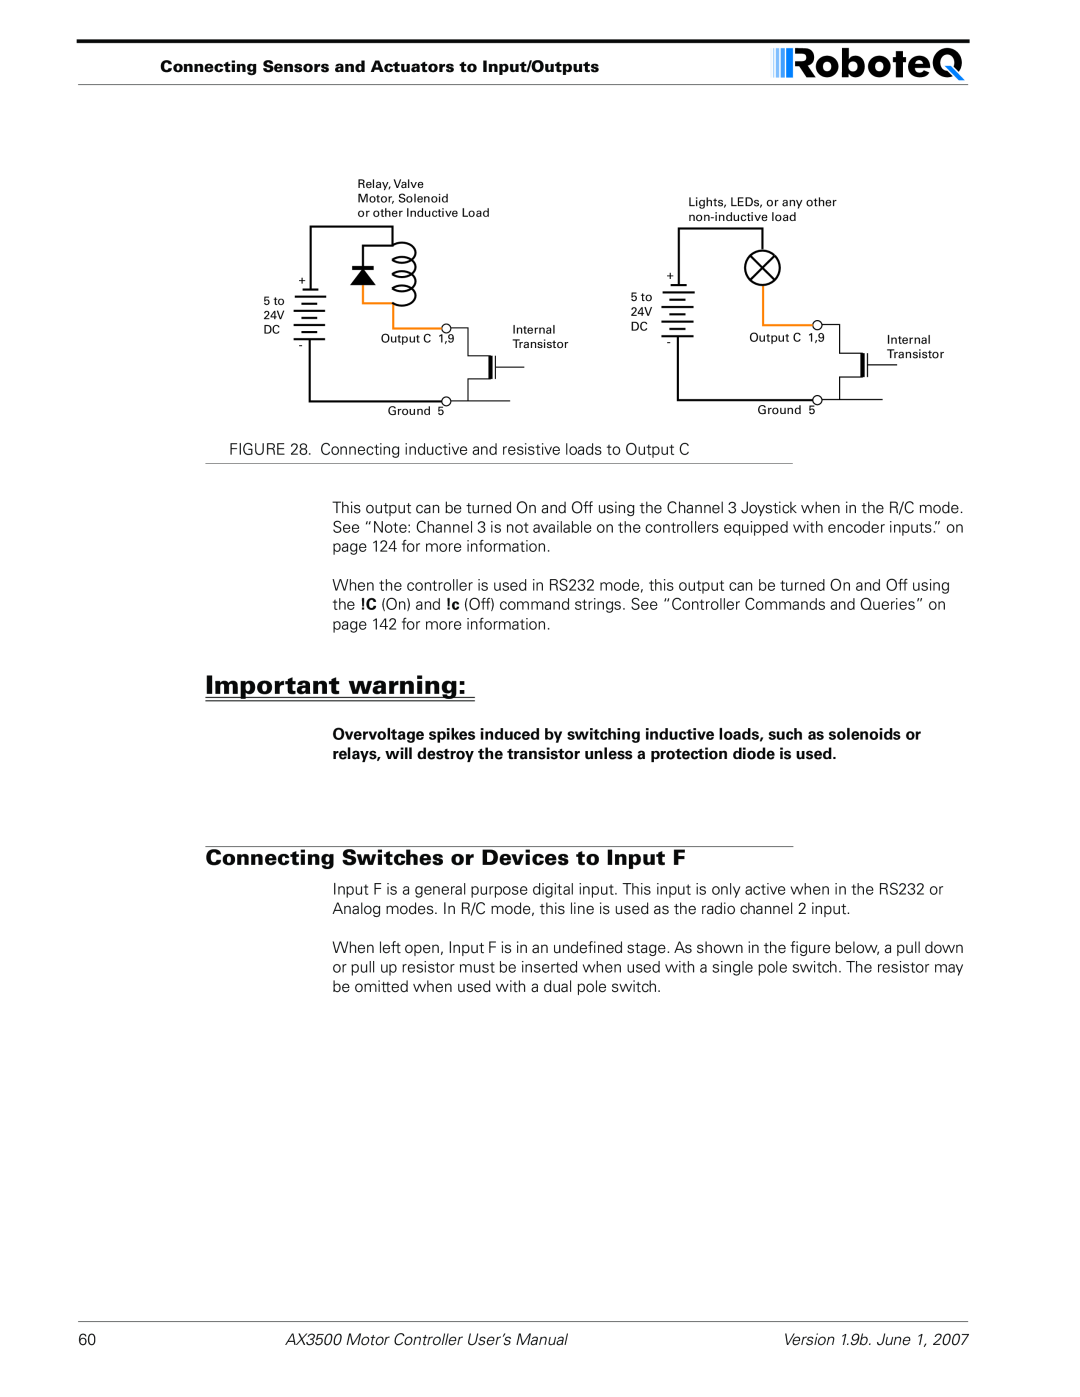 RoboteQ user manual Important warning, Connecting Switches or Devices to Input F, AX3500 Motor Controller User’s Manual 